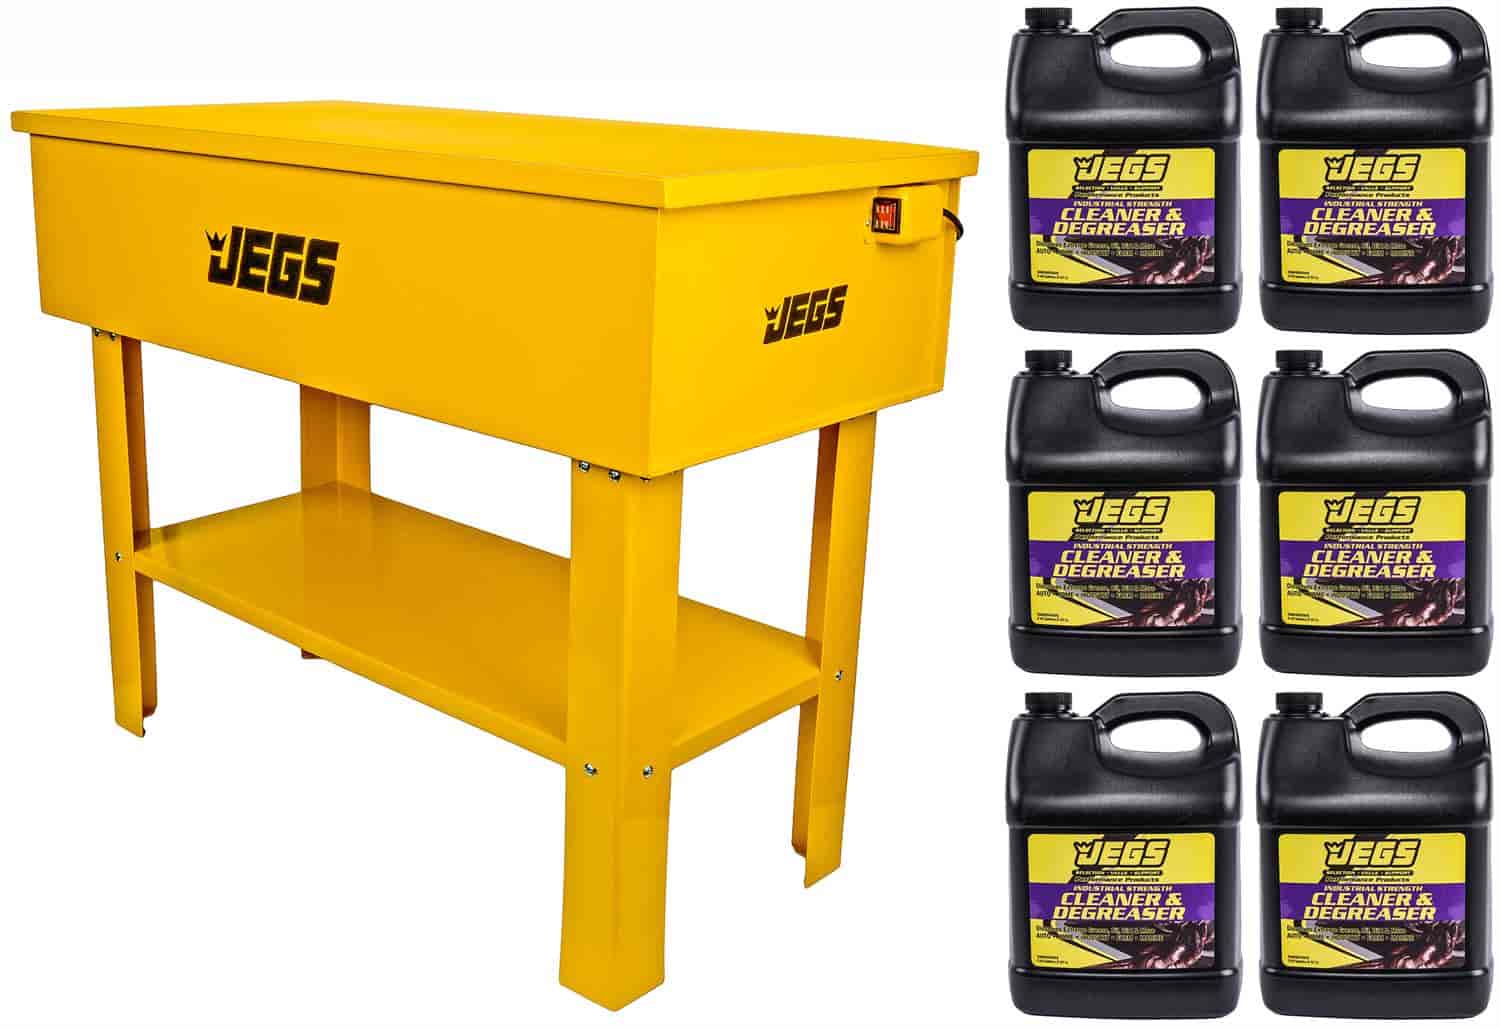 JEGS 81553K: 40-Gallon Parts Washer Kit with 6 Two Gallon Bottles of  Industrial Strength Cleaner & Degreaser - JEGS